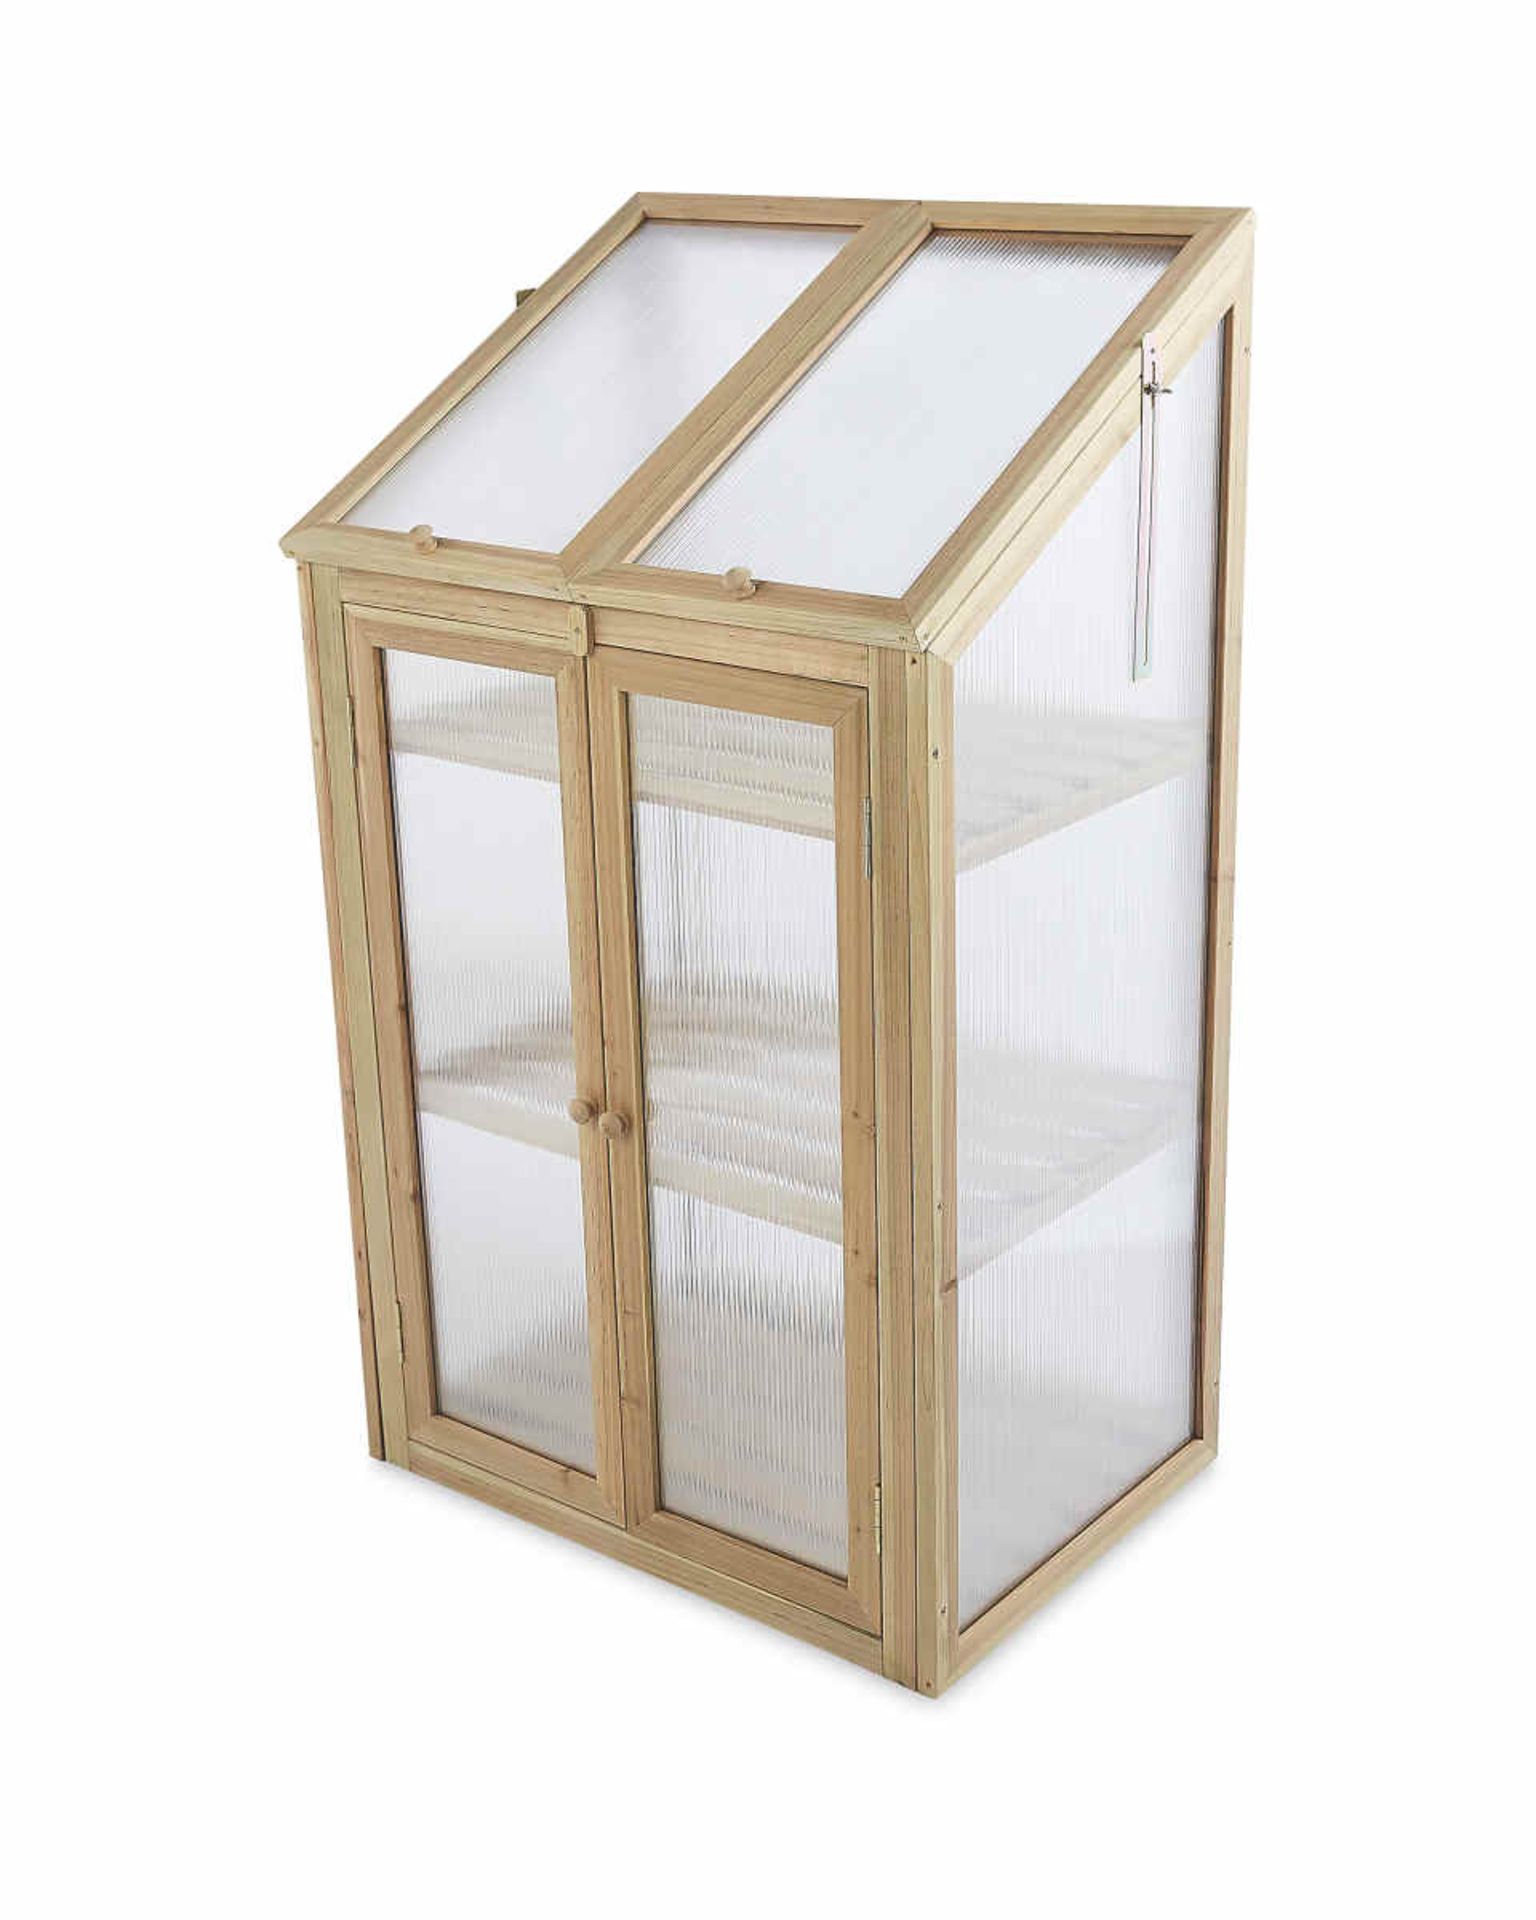 Natural Wooden Mini Greenhouse. Made from 100% sustainable fir wood, this Natural Wooden Mini